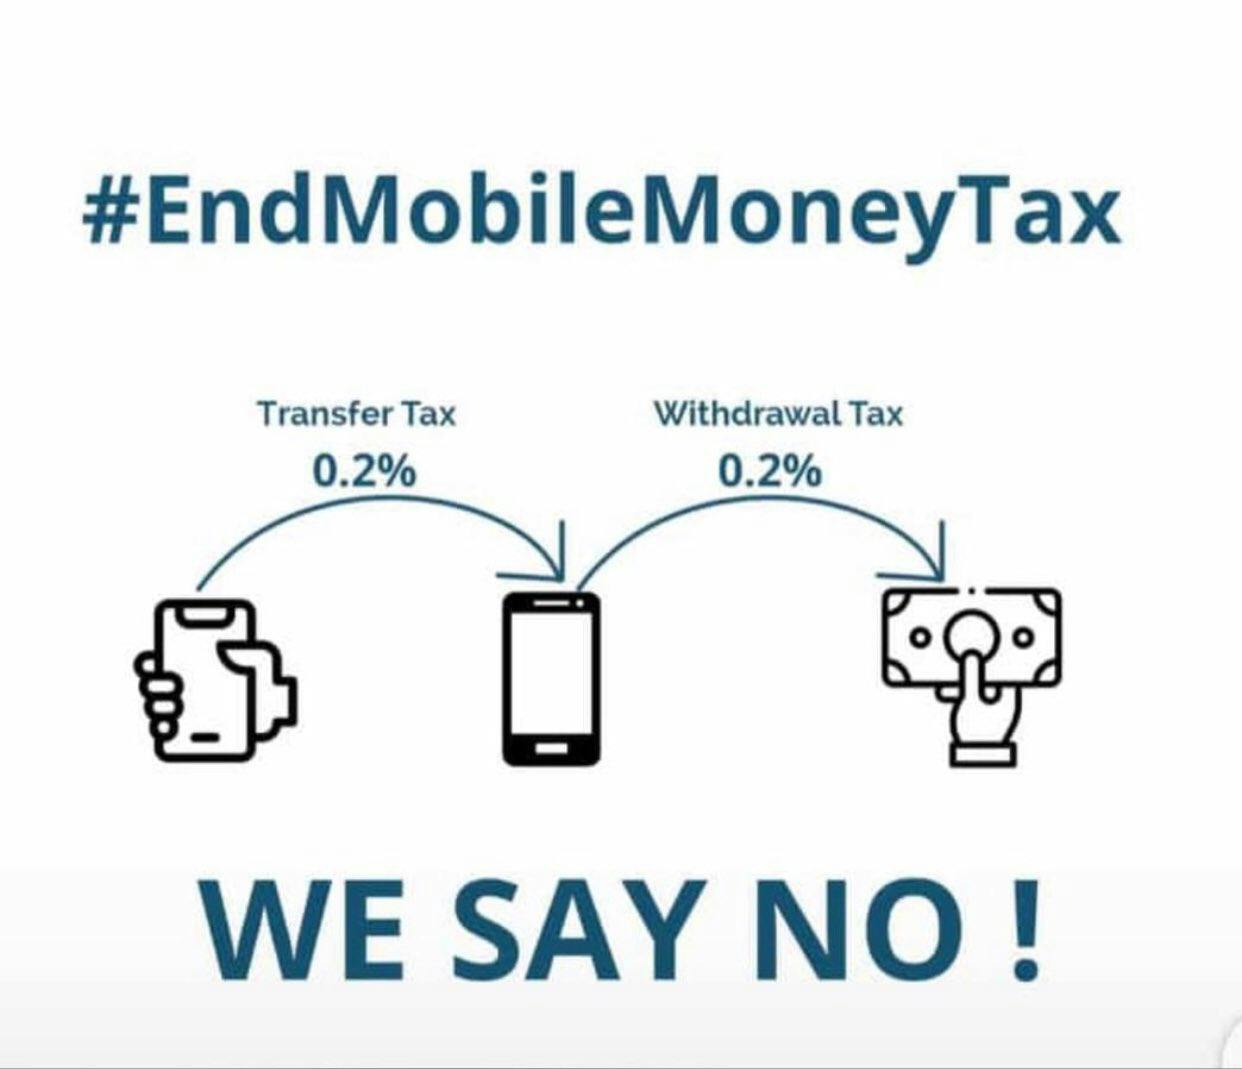 New tax on mobile money transactions